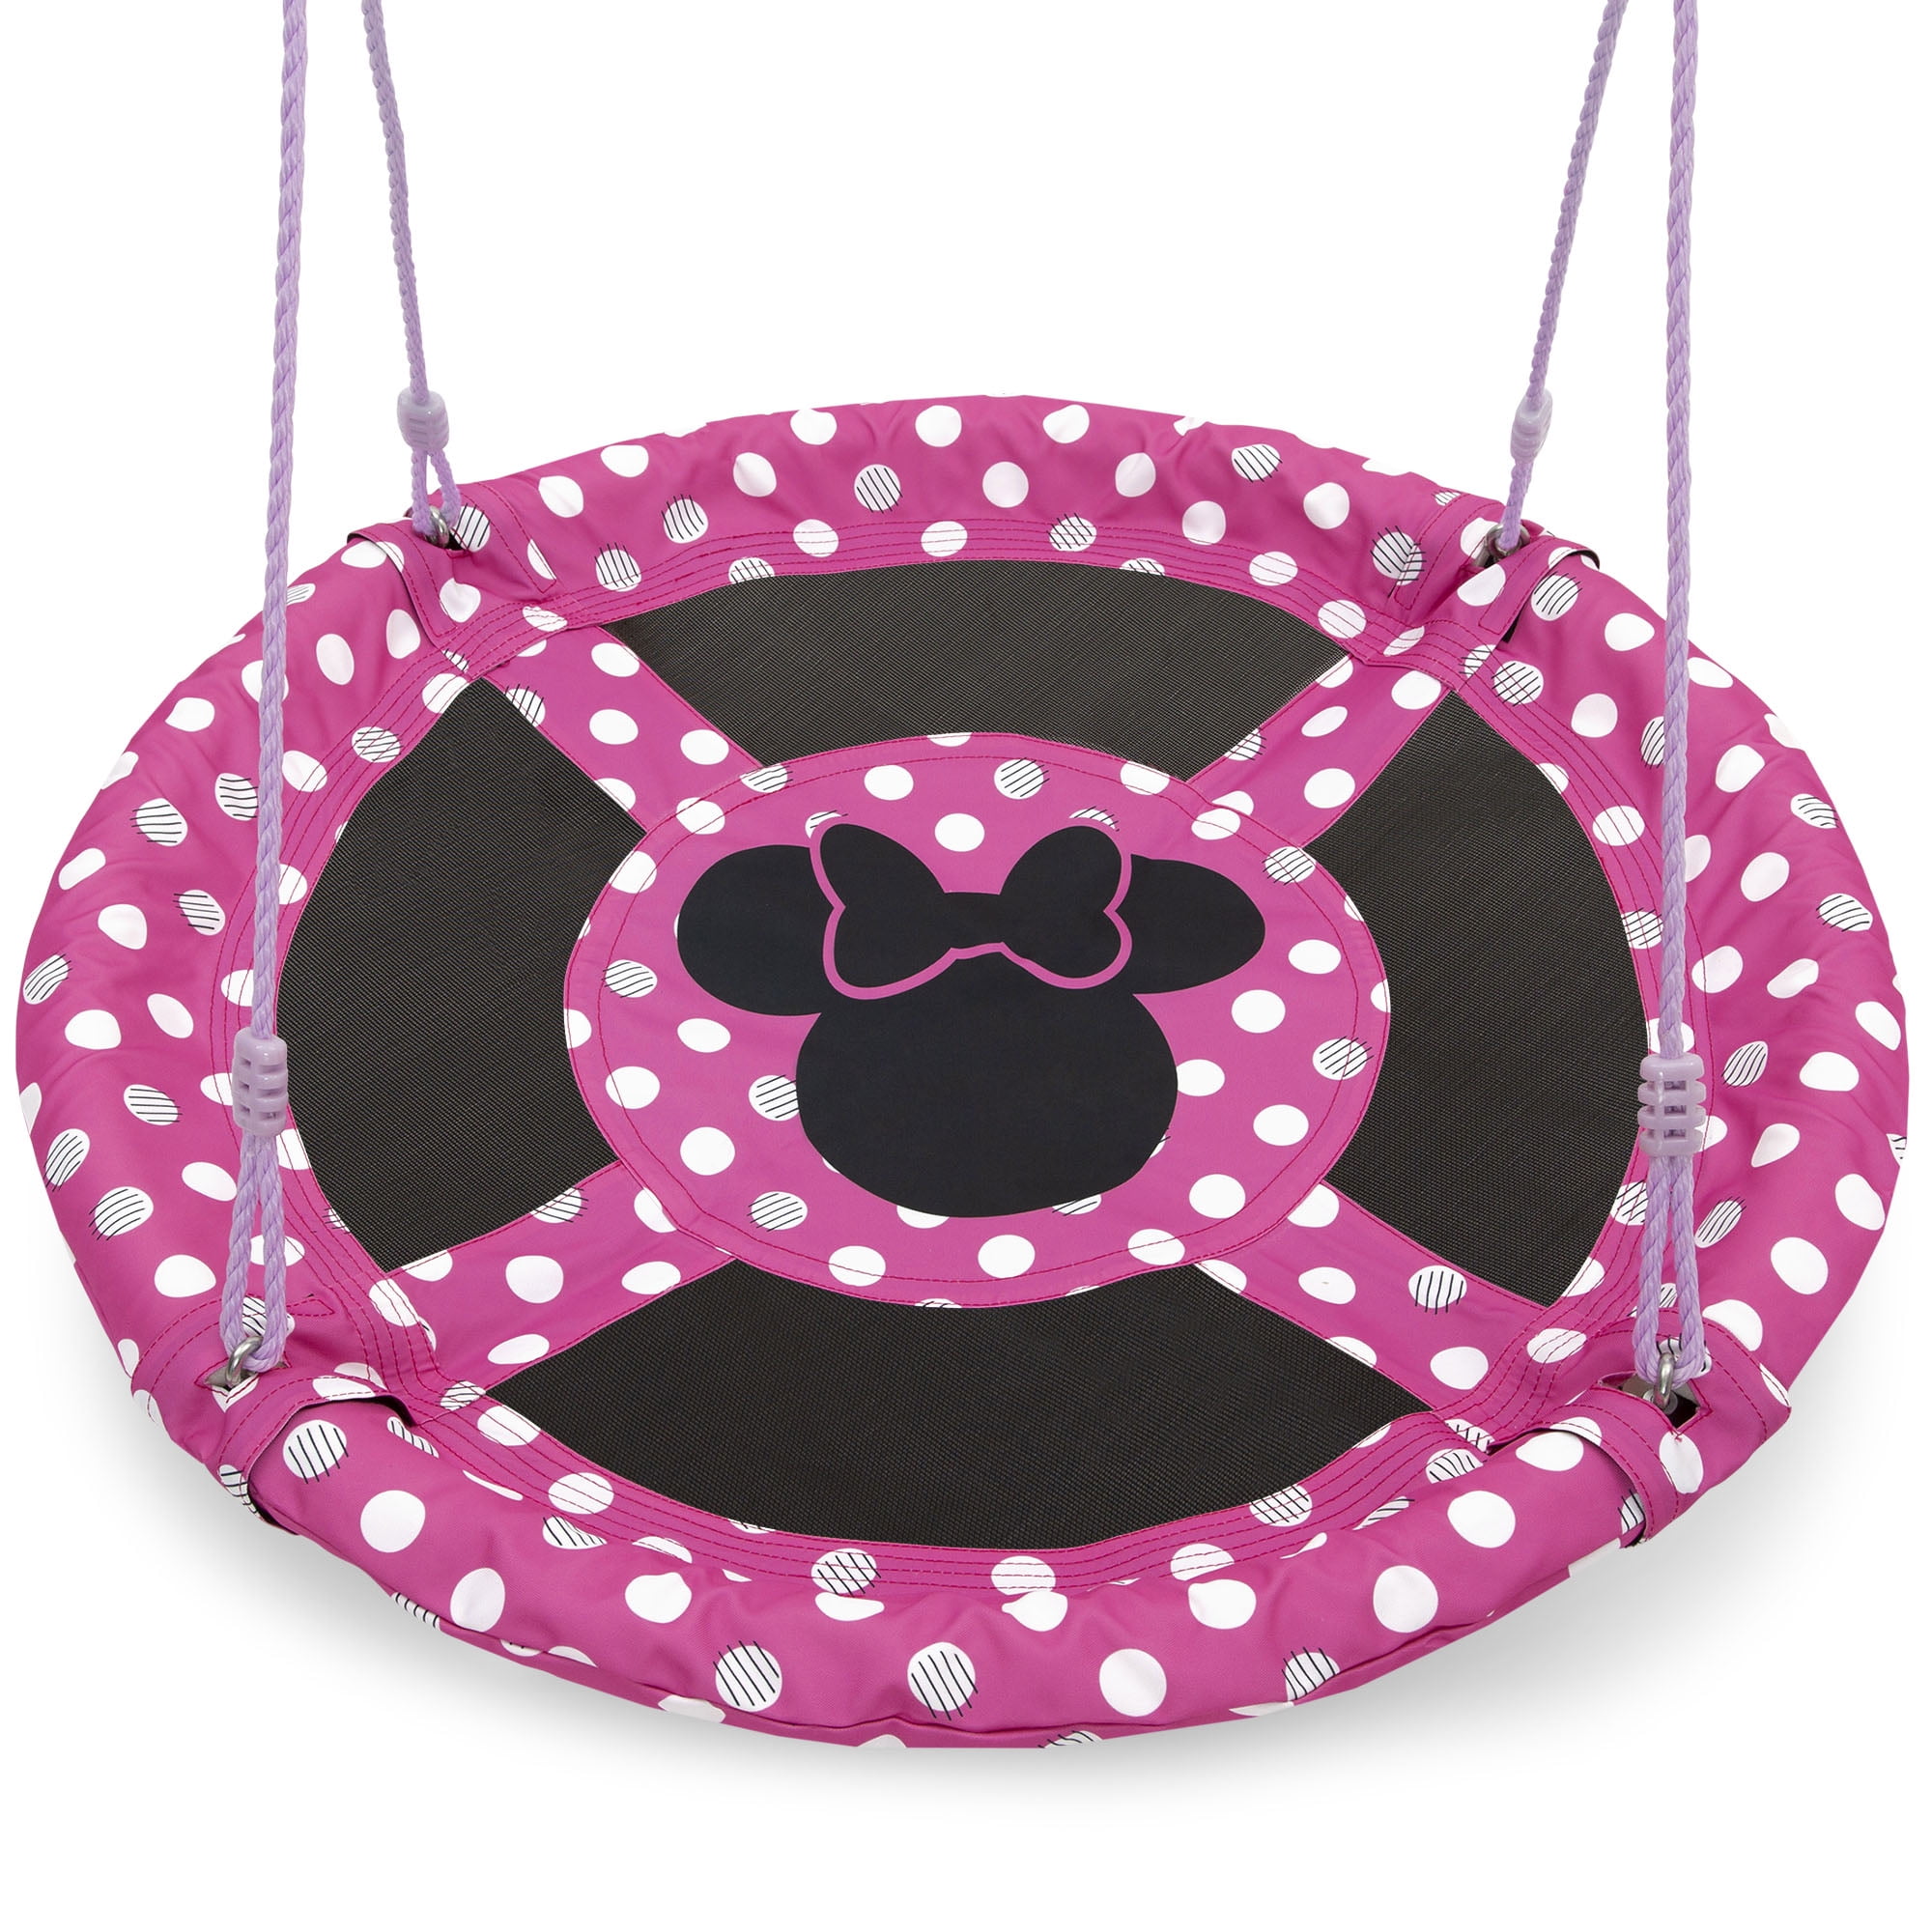 Disney Minnie Mouse 40 Inch Saucer Swing Includes Hardware For Swing